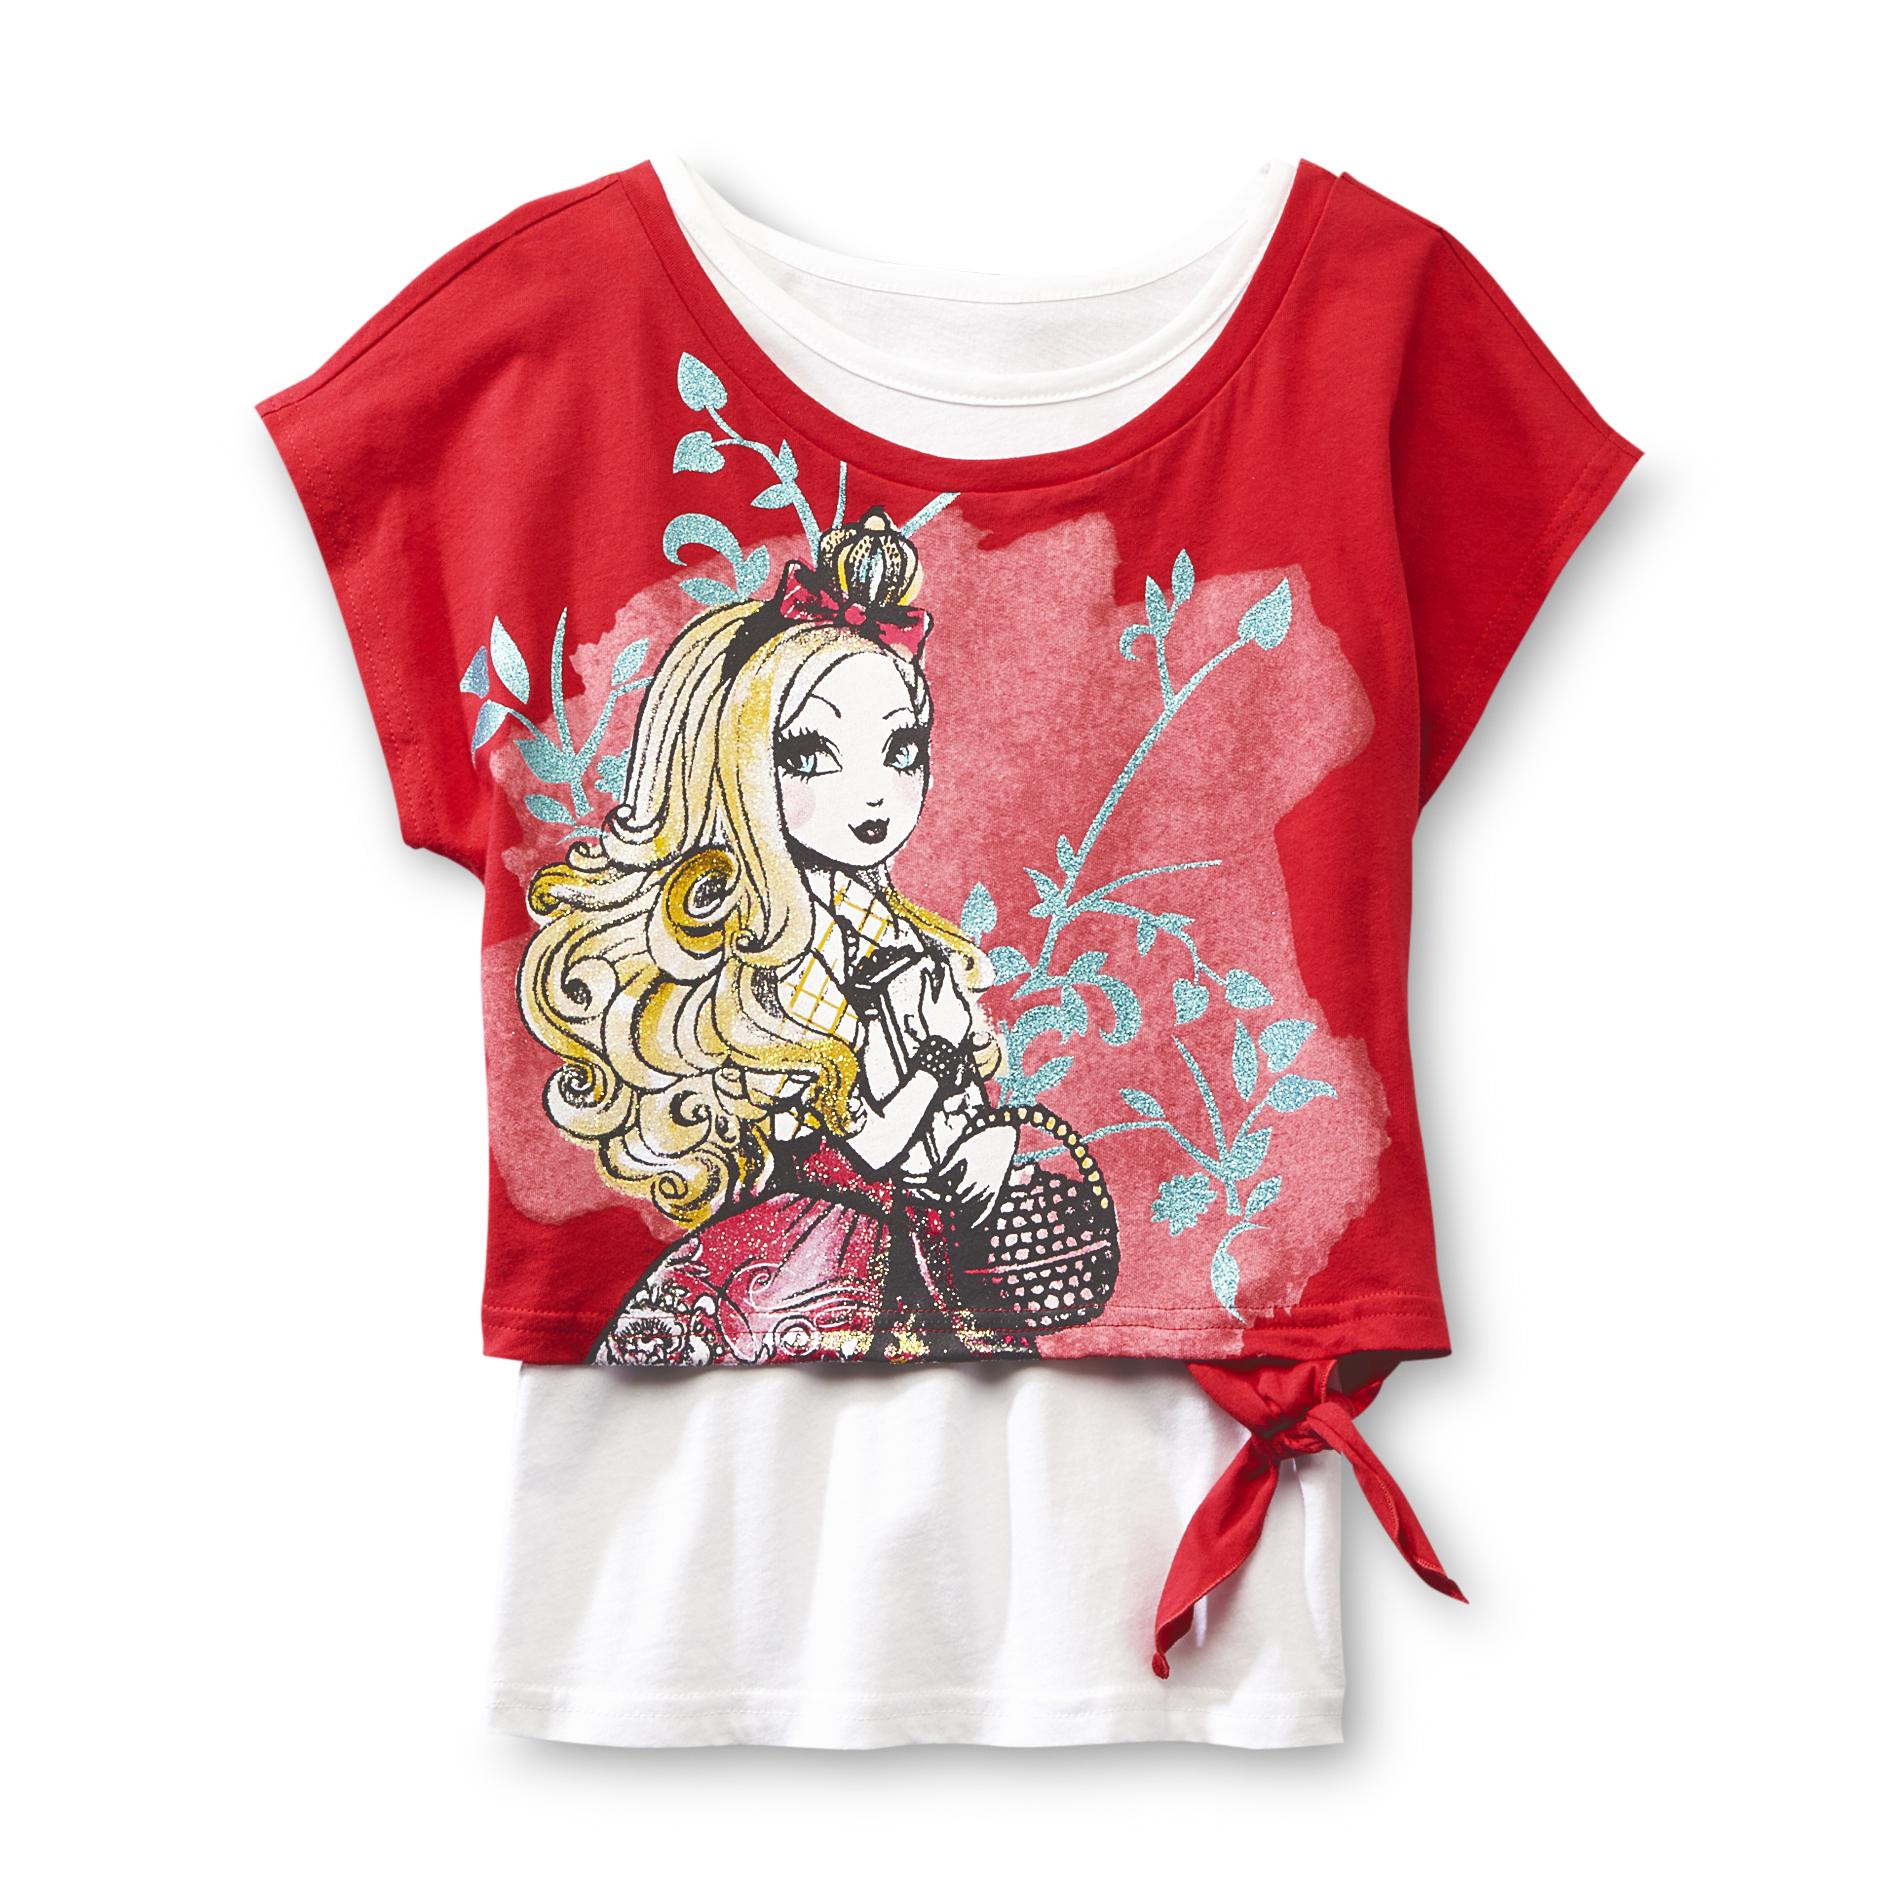 Ever After High Girl's Crop Top & Tank Top - Apple White